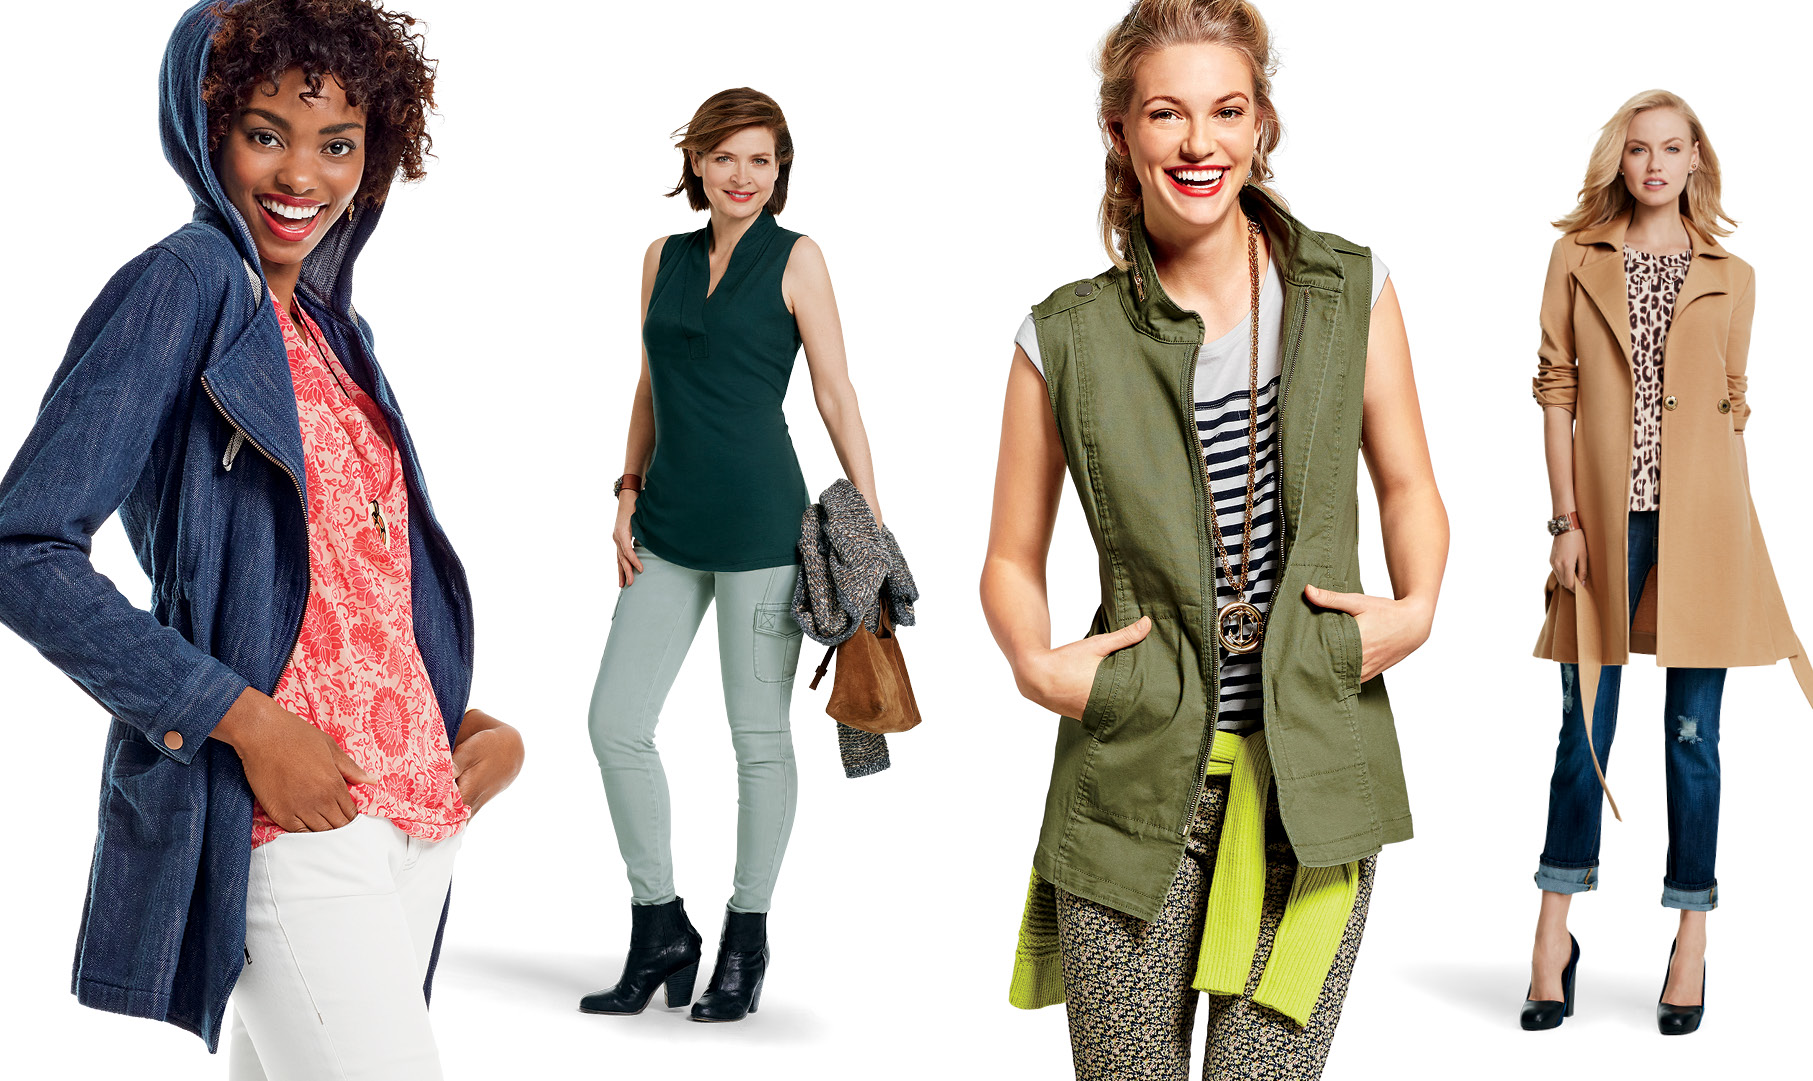 fashion finds! These are perfect for transitional fall